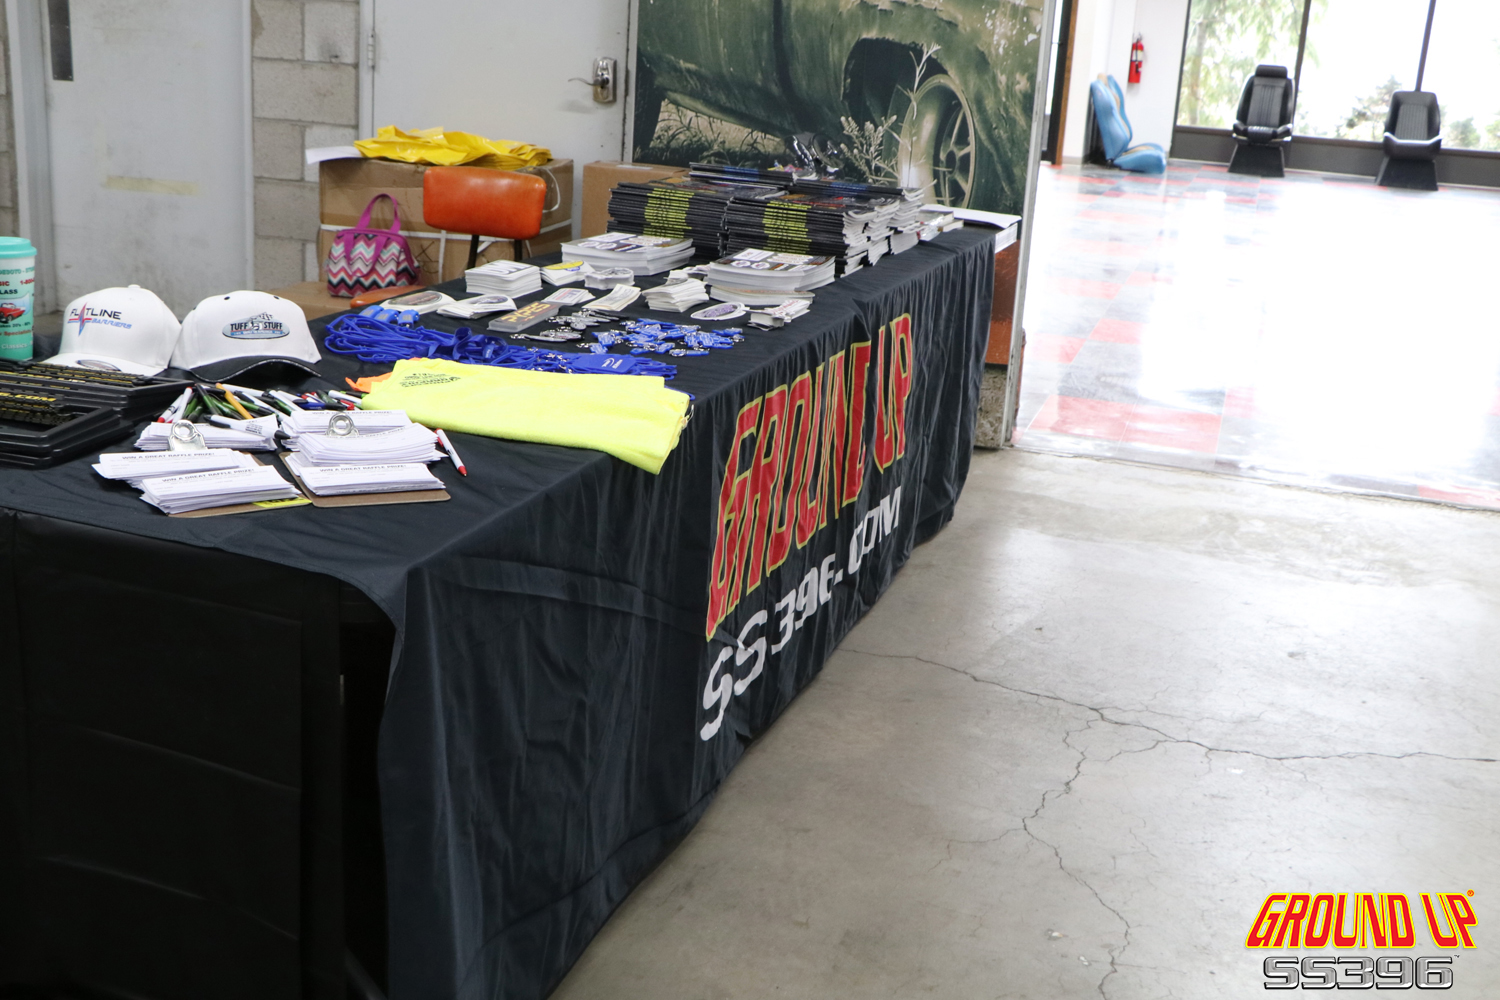 2019 Ground Up Vendor Expo - Ground Up Giveaways